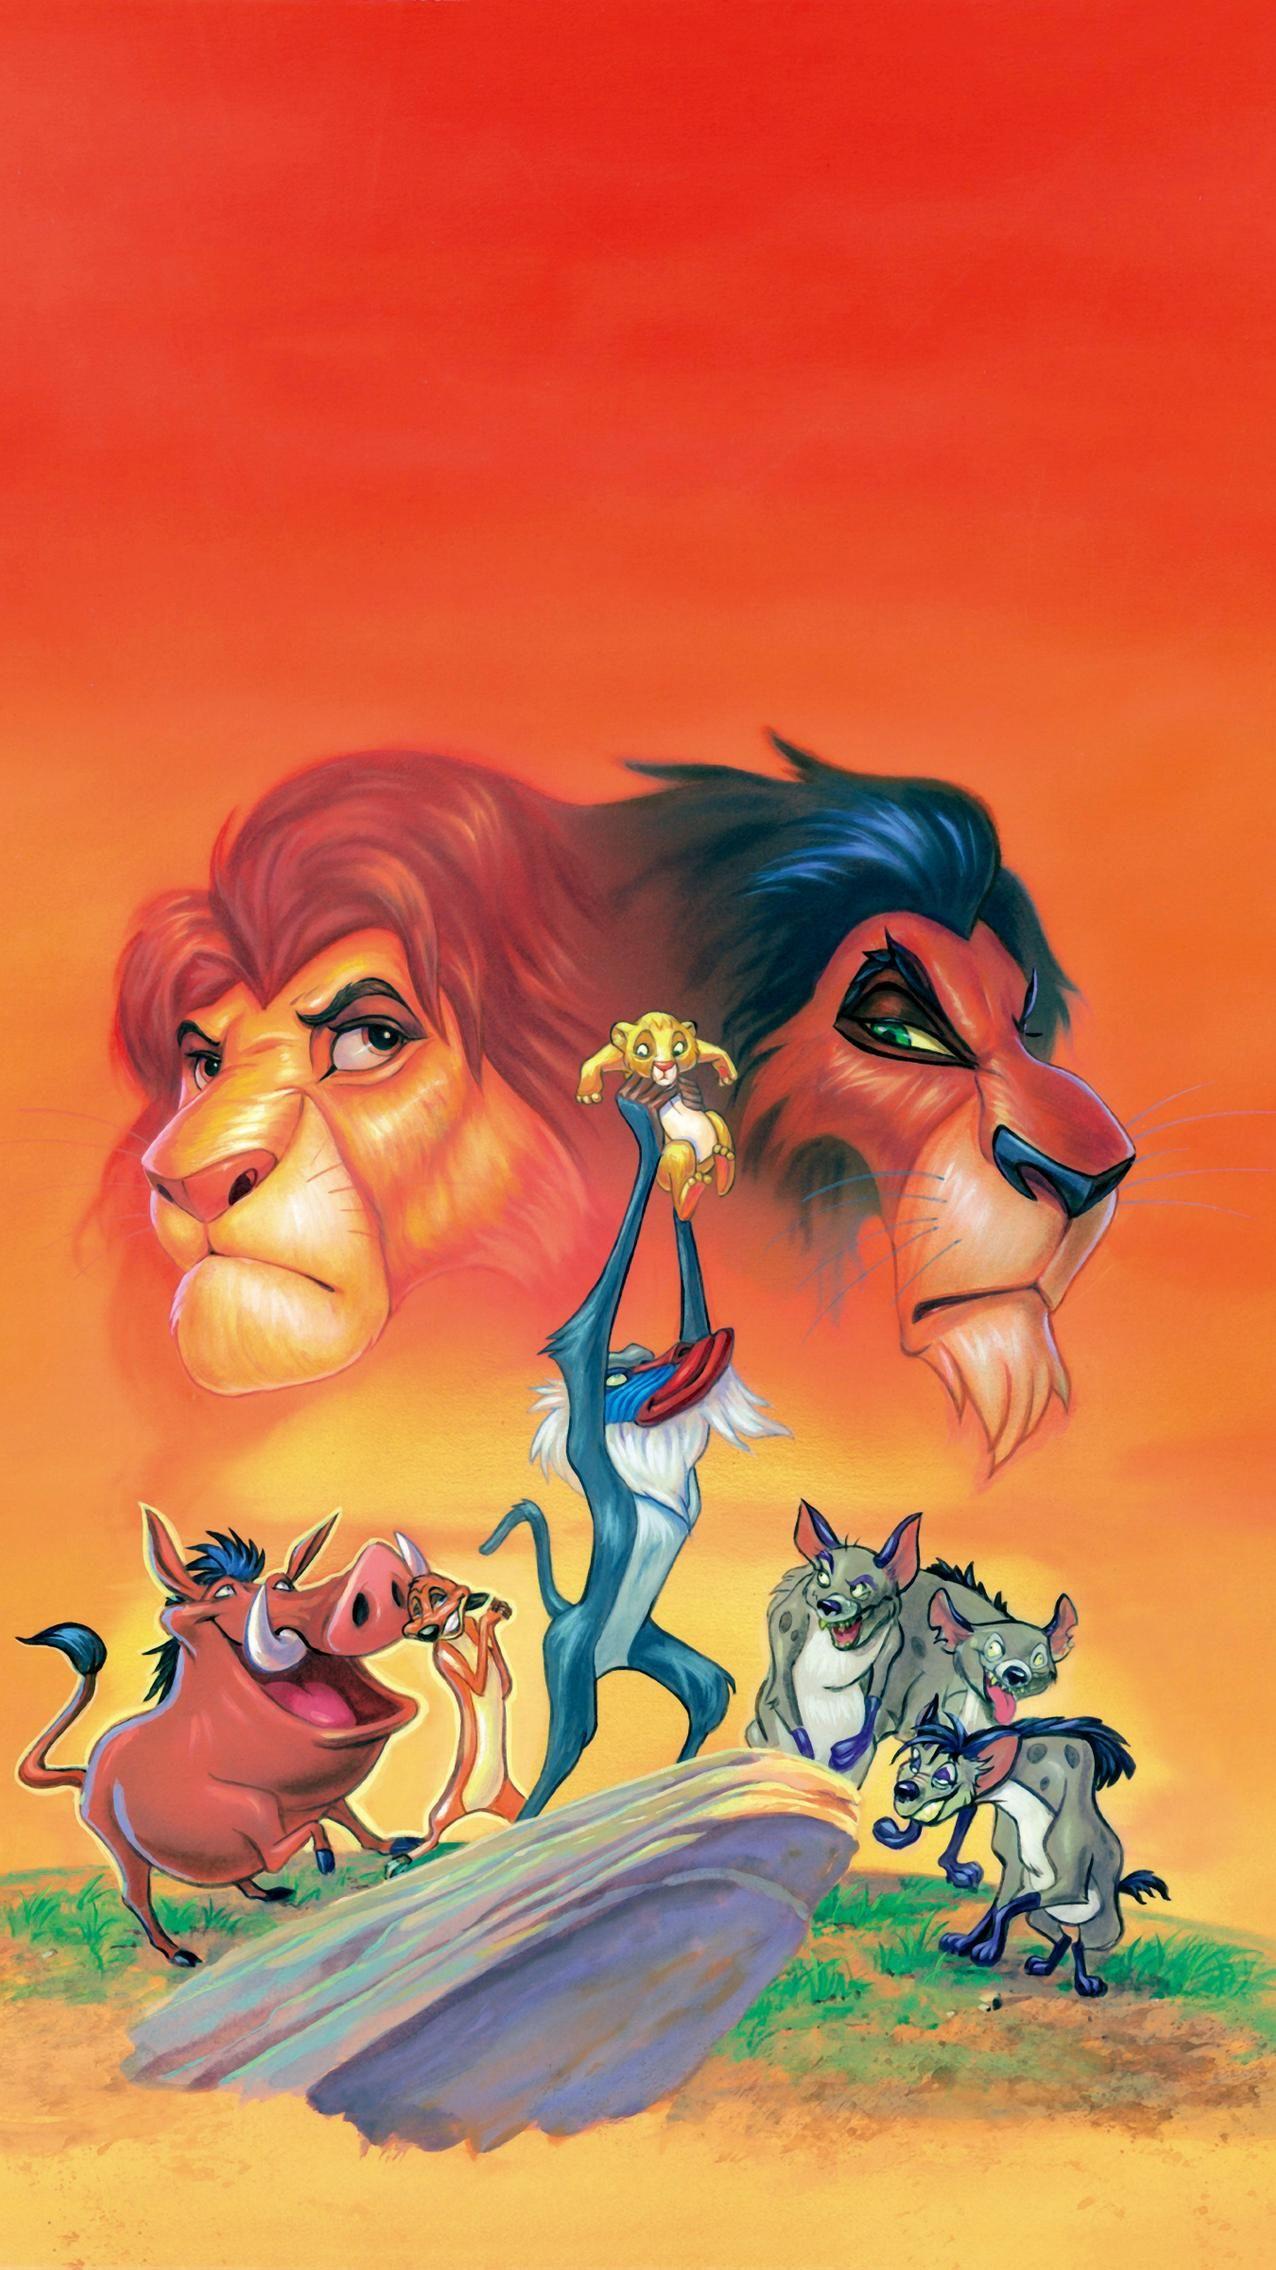 The Lion King wallpaper 1242x2688 for iPhone X - The Lion King